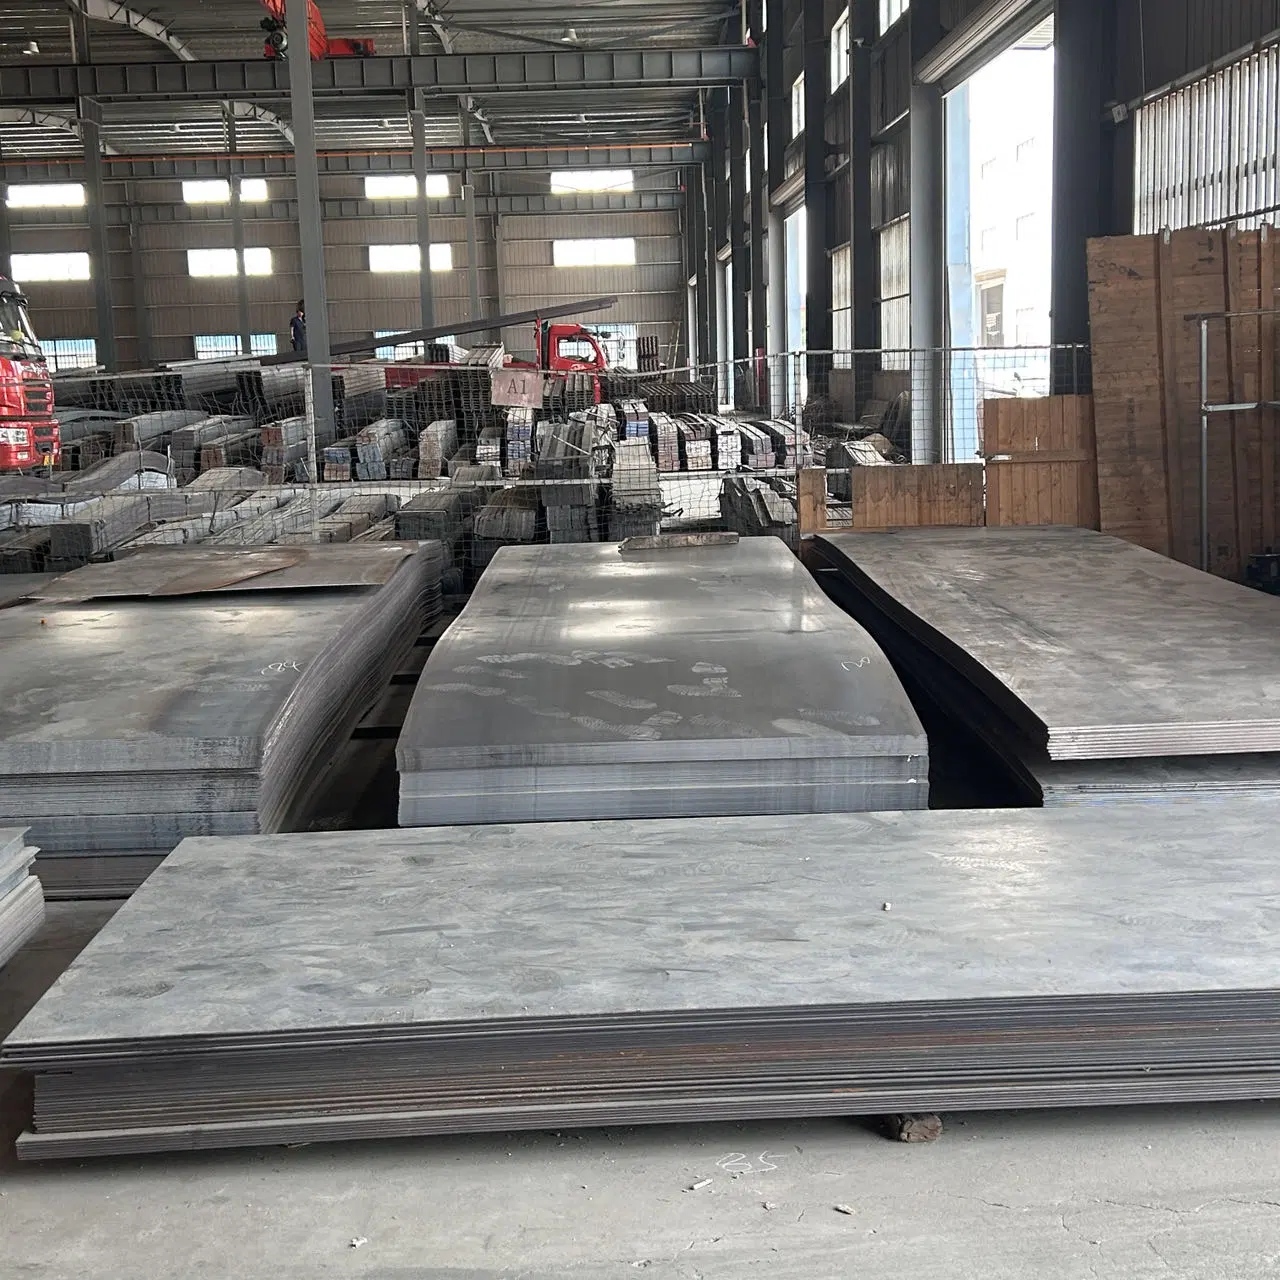 Hot Rolled Low Carbon Steel Sheet 1mm 2mm 3mm Thick Mild Carbon Steel Plate ASTM/Q235A/Q235B/S235jr/St33/ A573/65mn 4140 Carbon Steel